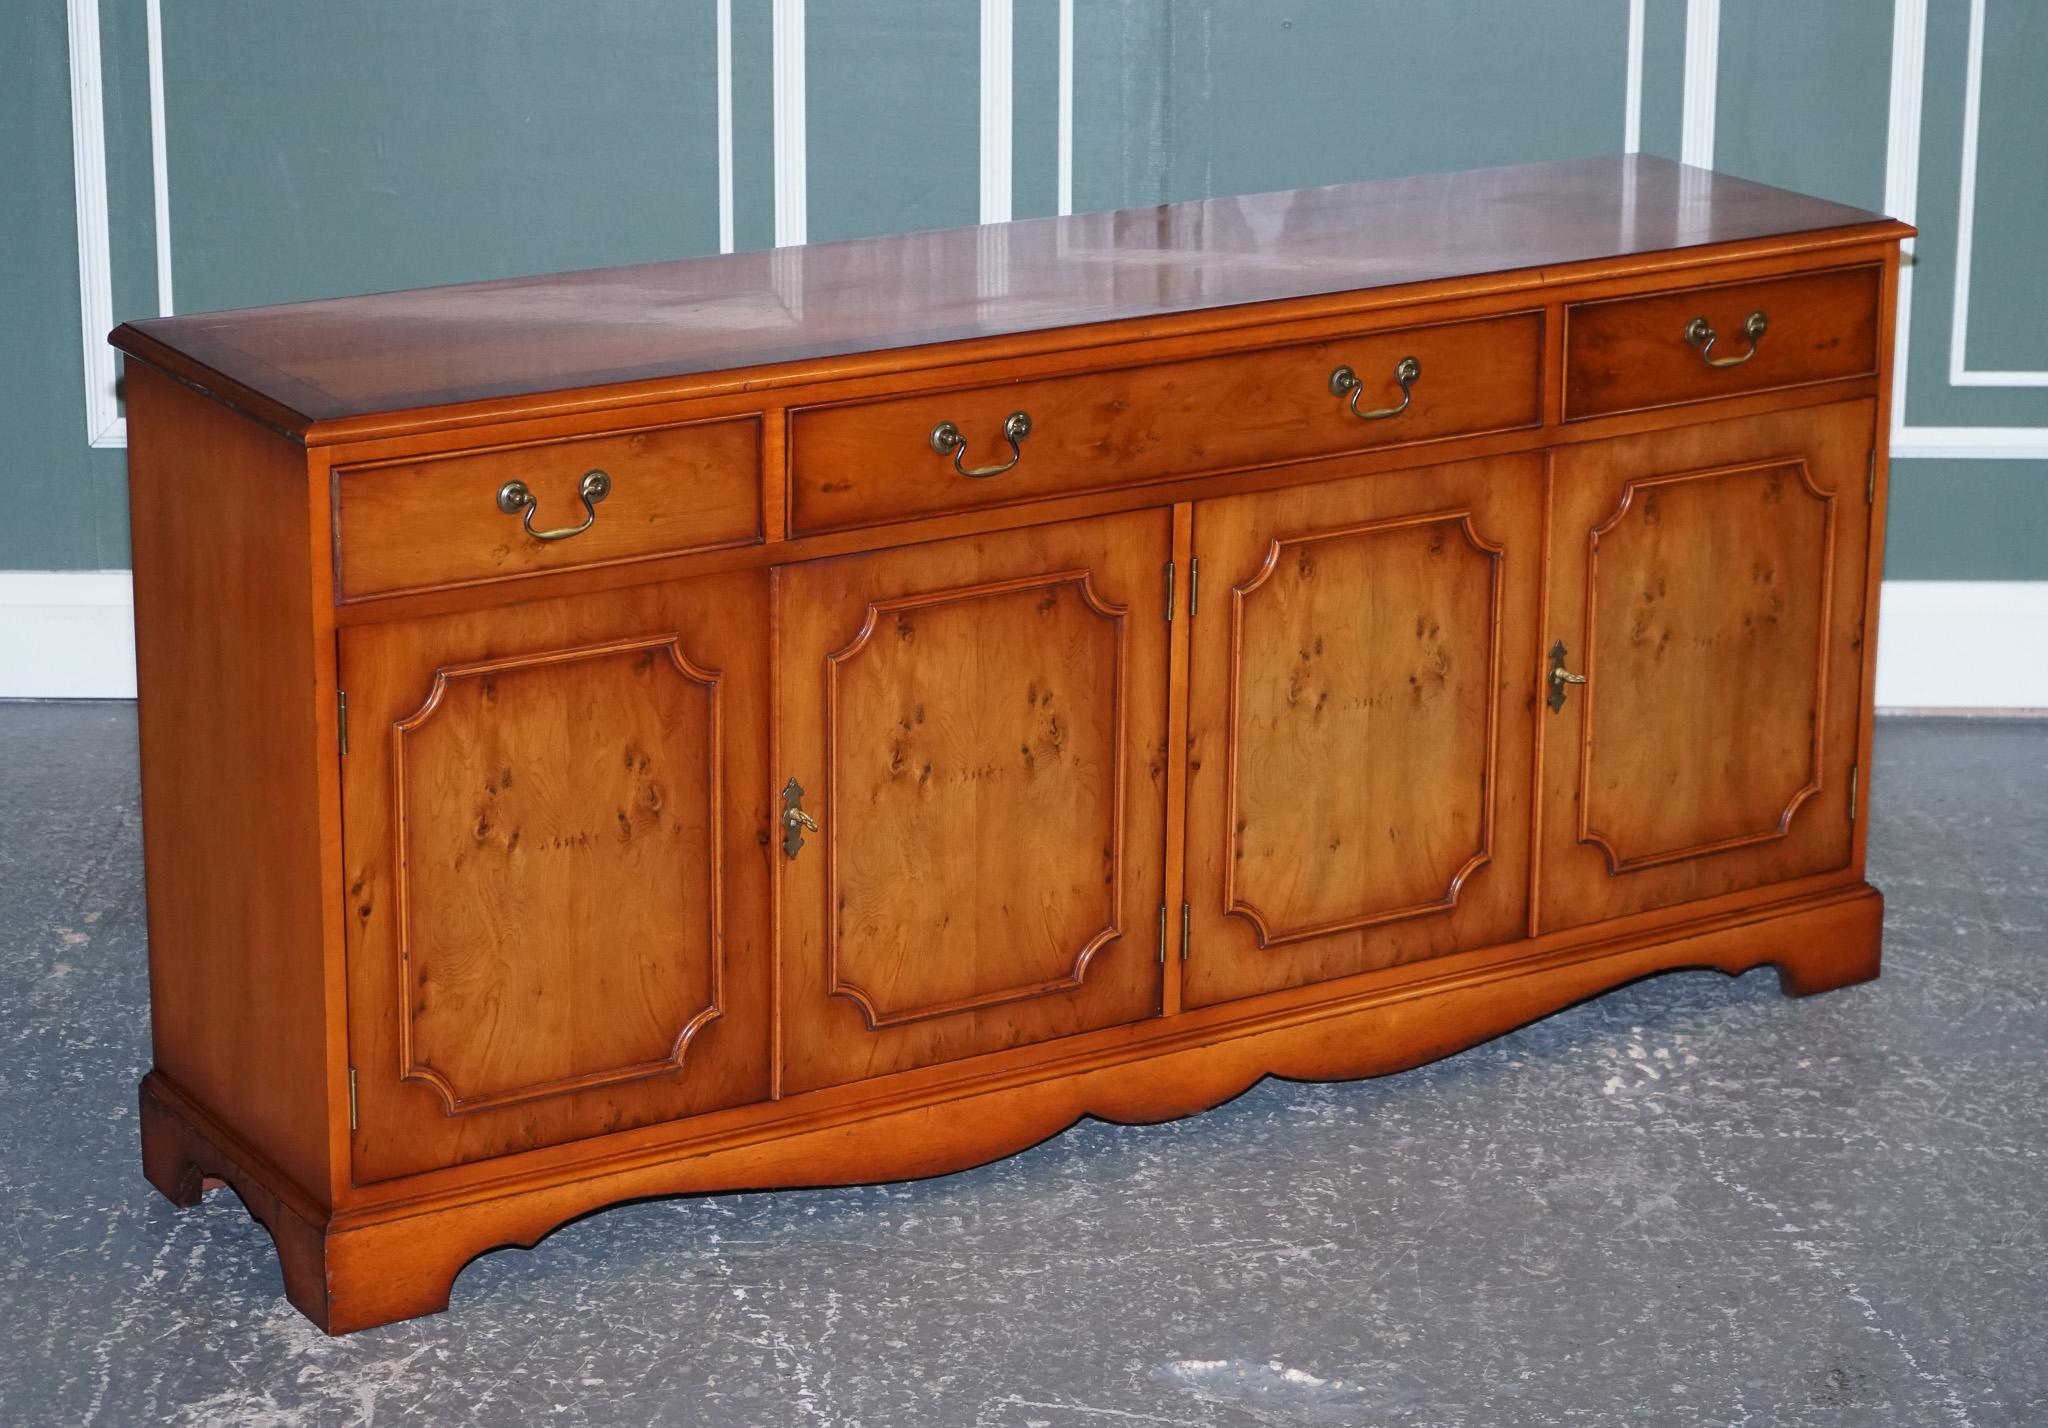 We are delighted to offer for sale this lovely vintage Bradley burr yew wood sideboard. 

We have lightly restored this by cleaning it, waxing and hand polishing it.

Please carefully examine the pictures to see the condition before purchasing,